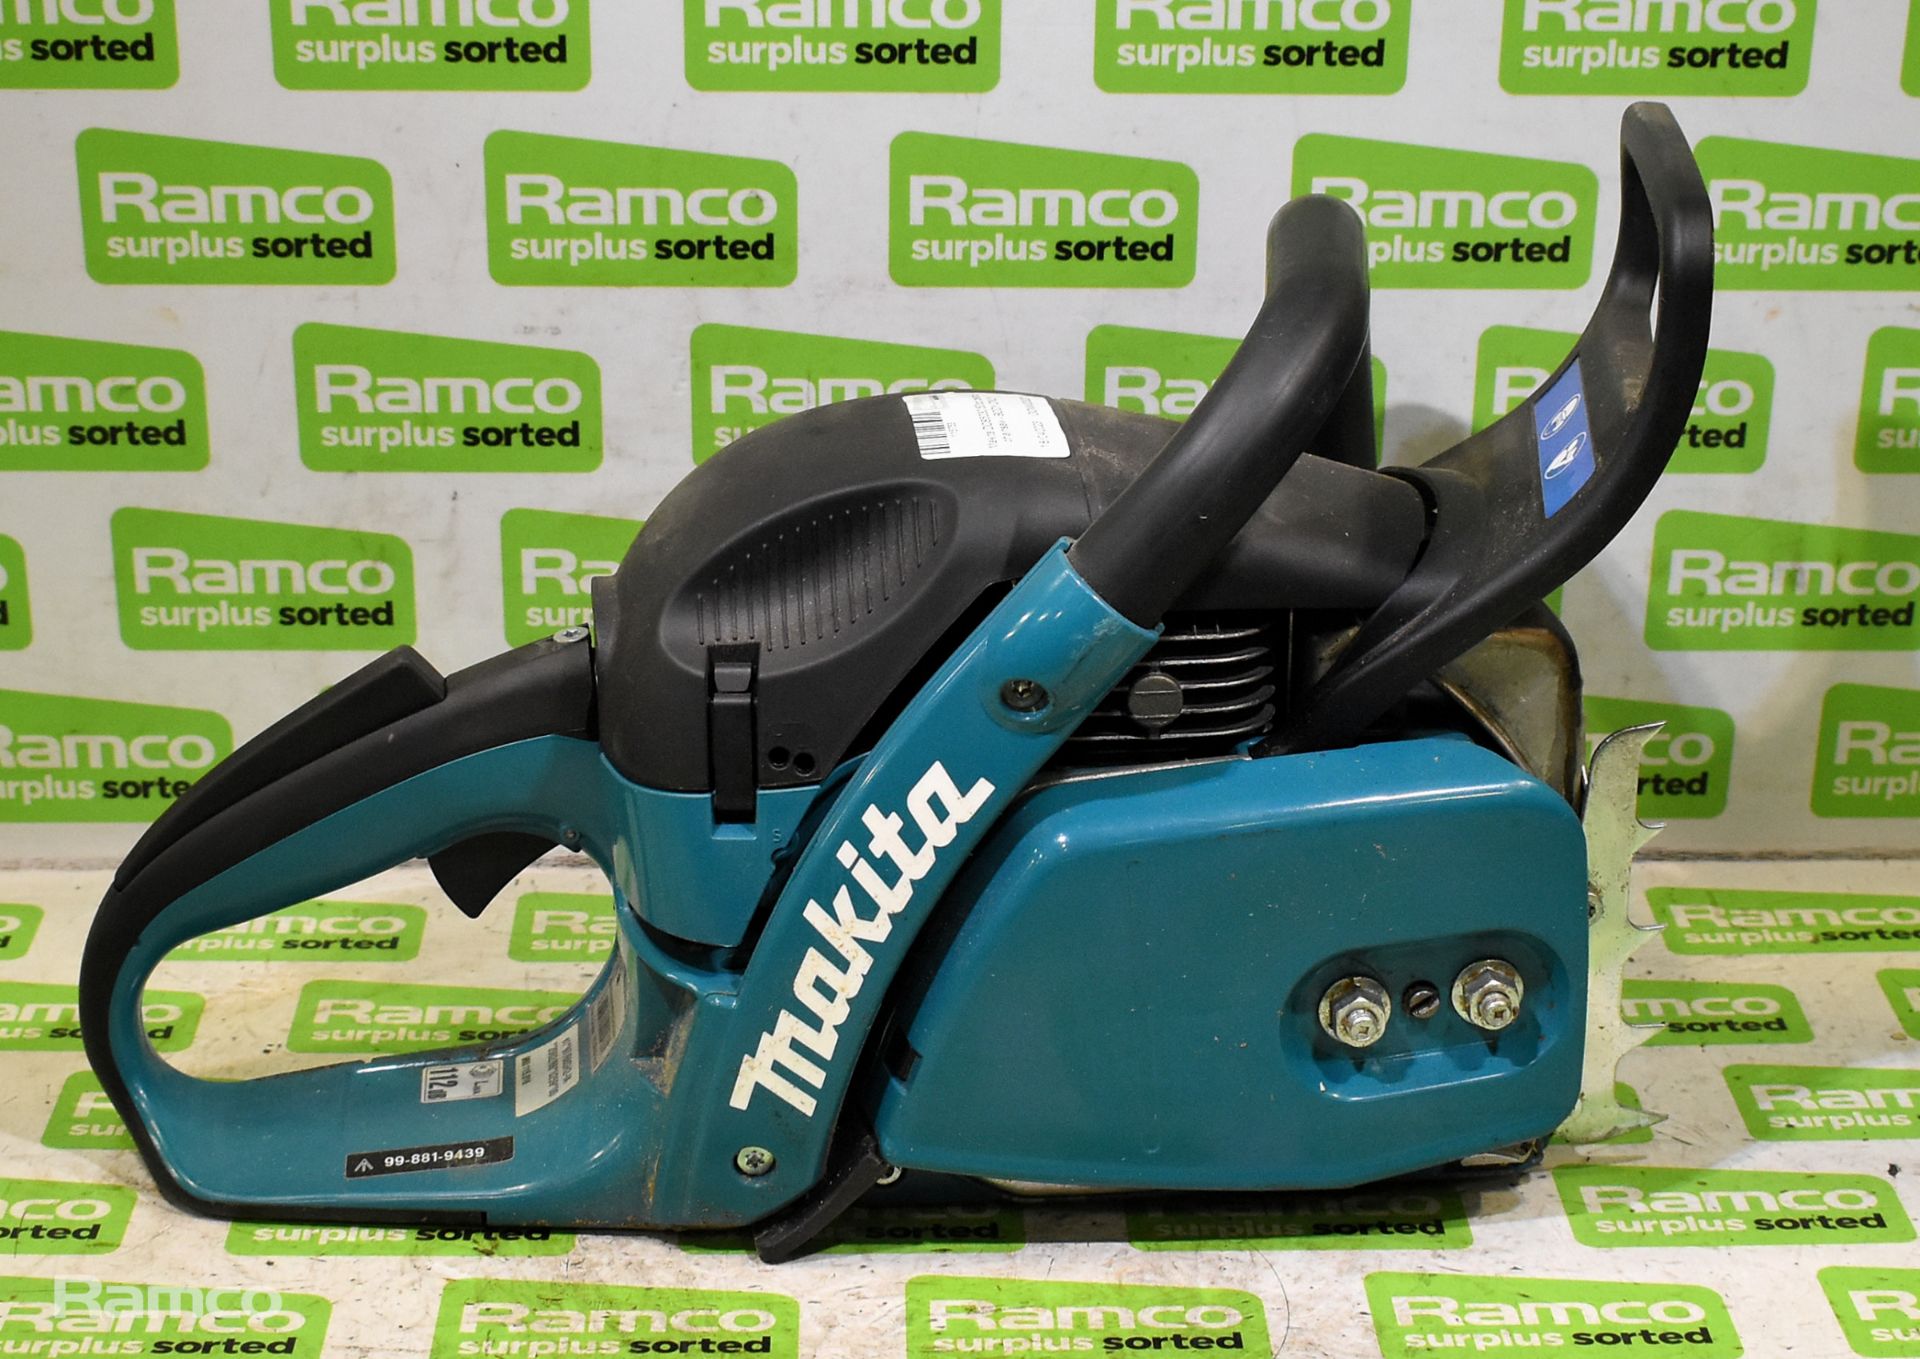 6x Makita DCS5030 50cc petrol chainsaw - BODIES ONLY - AS SPARES & REPAIRS - Image 19 of 33